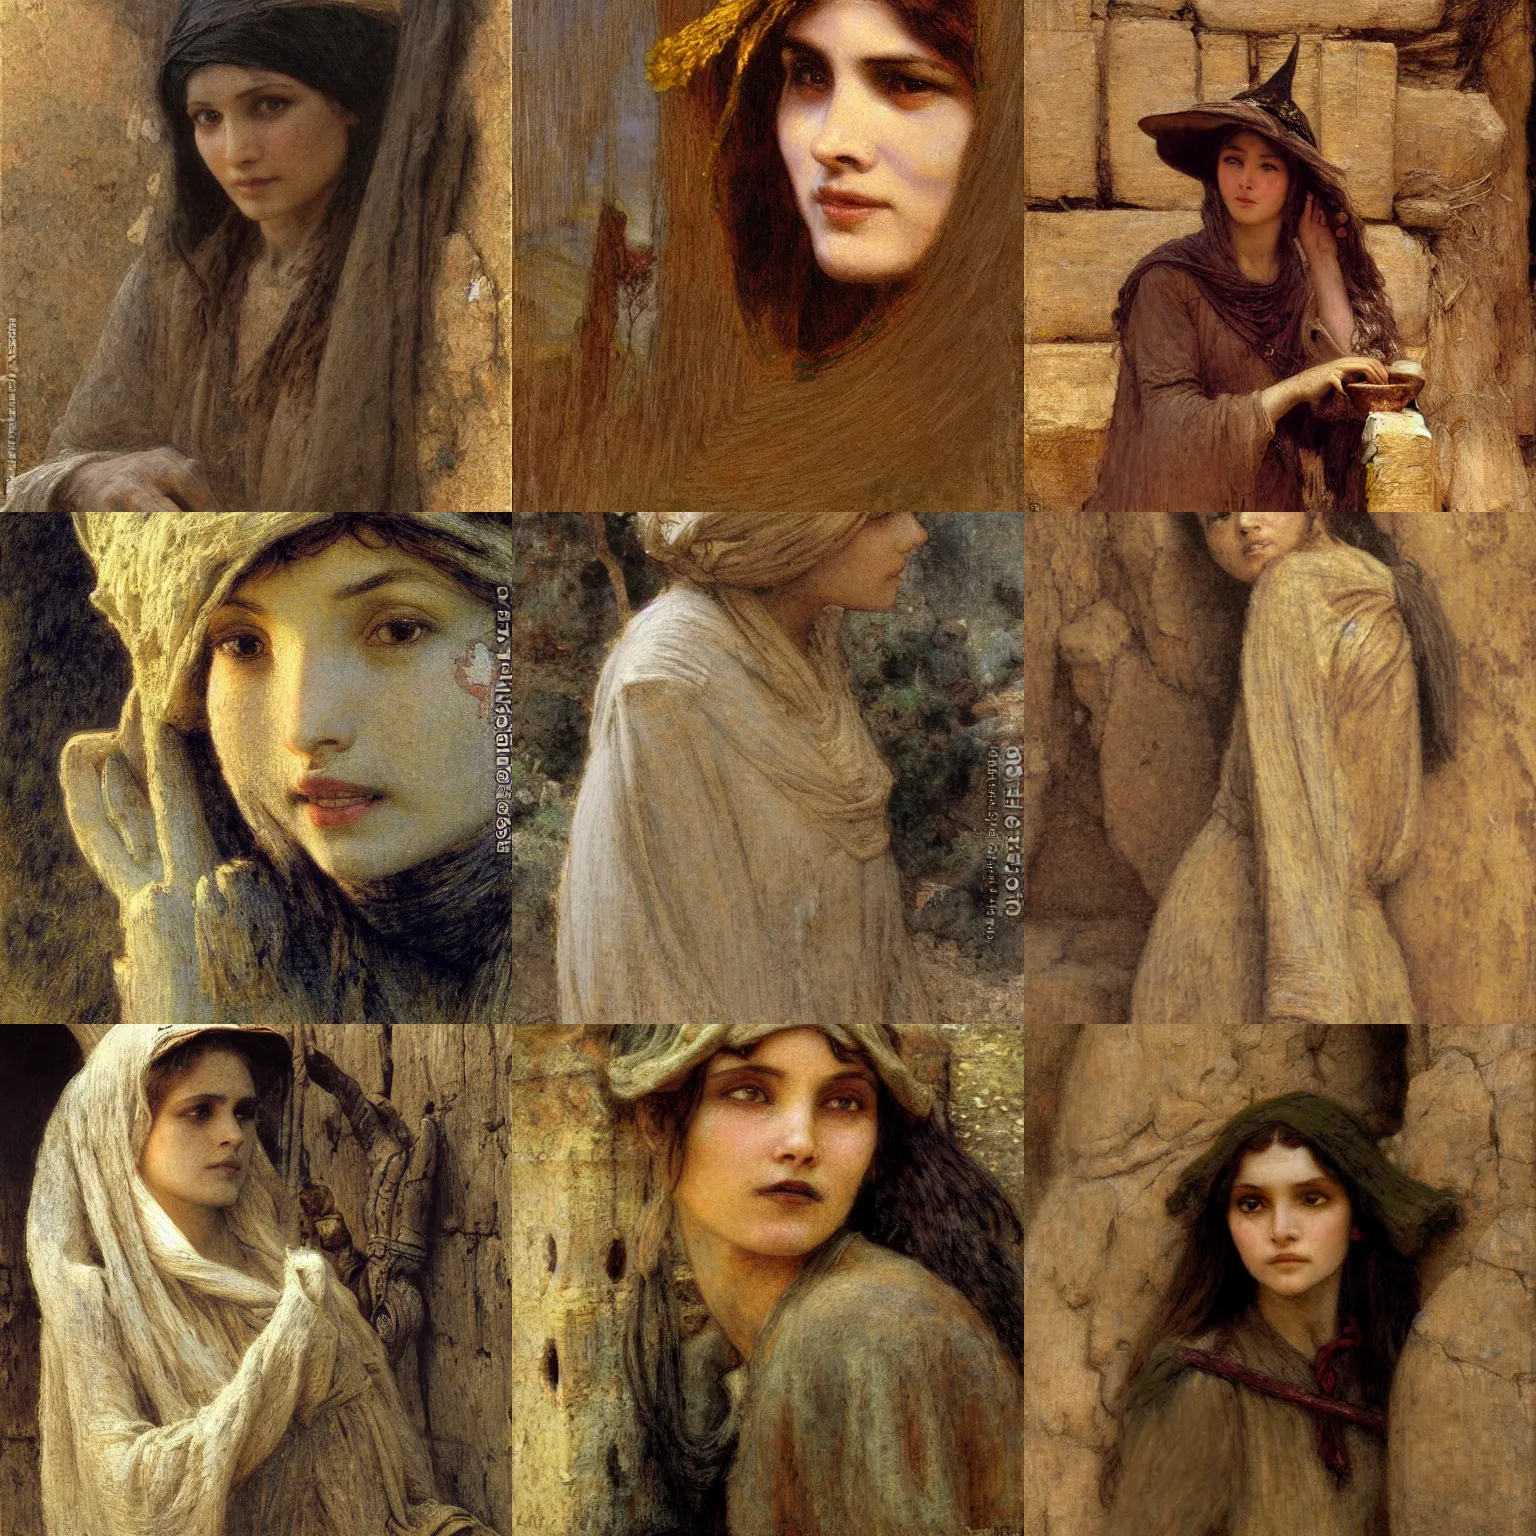 Prompt: orientalism cute witch standing in a sandstone ruin face detail by theodore ralli and jules bastien - lepage and and annie swynnerton, masterful intricate artwork, excellent lighting, high detail 8 k